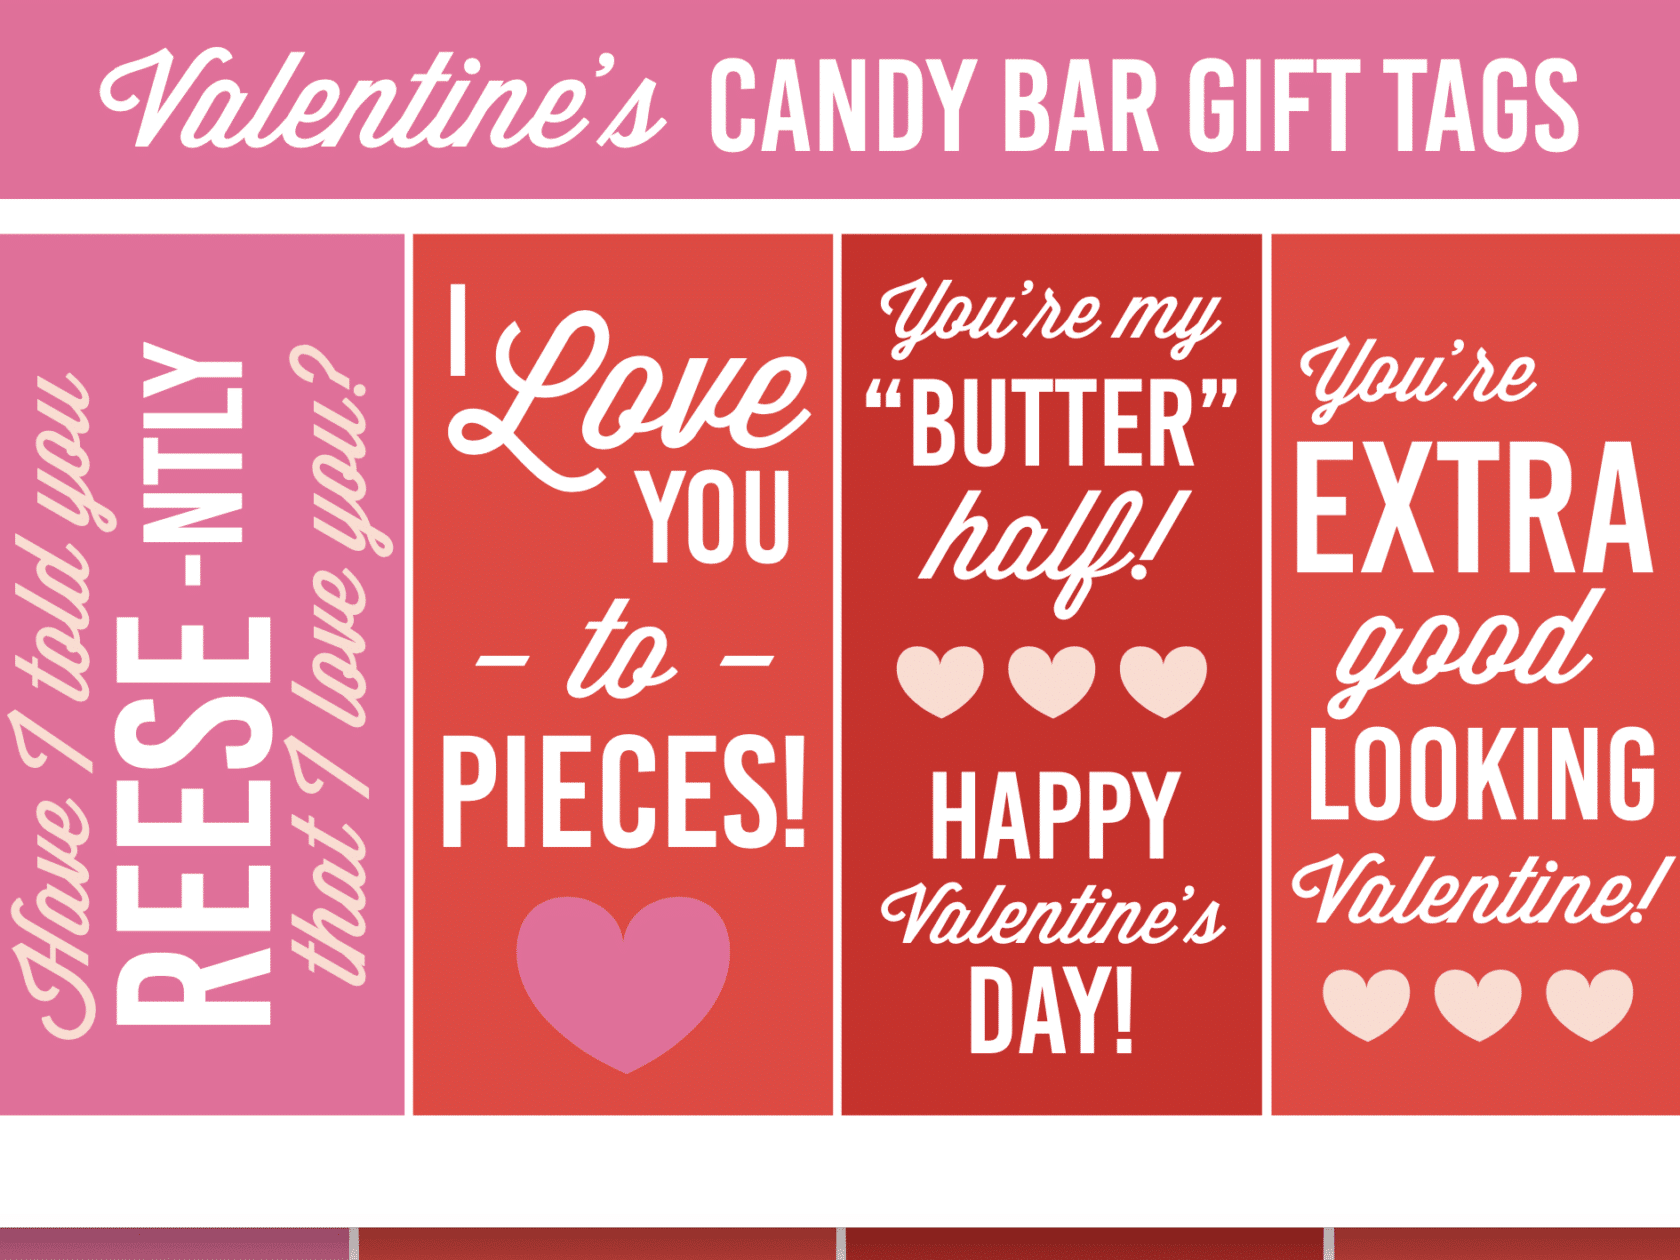 Candy bar love note printables to give as last minute Valentine's Day gifts | The Dating Divas